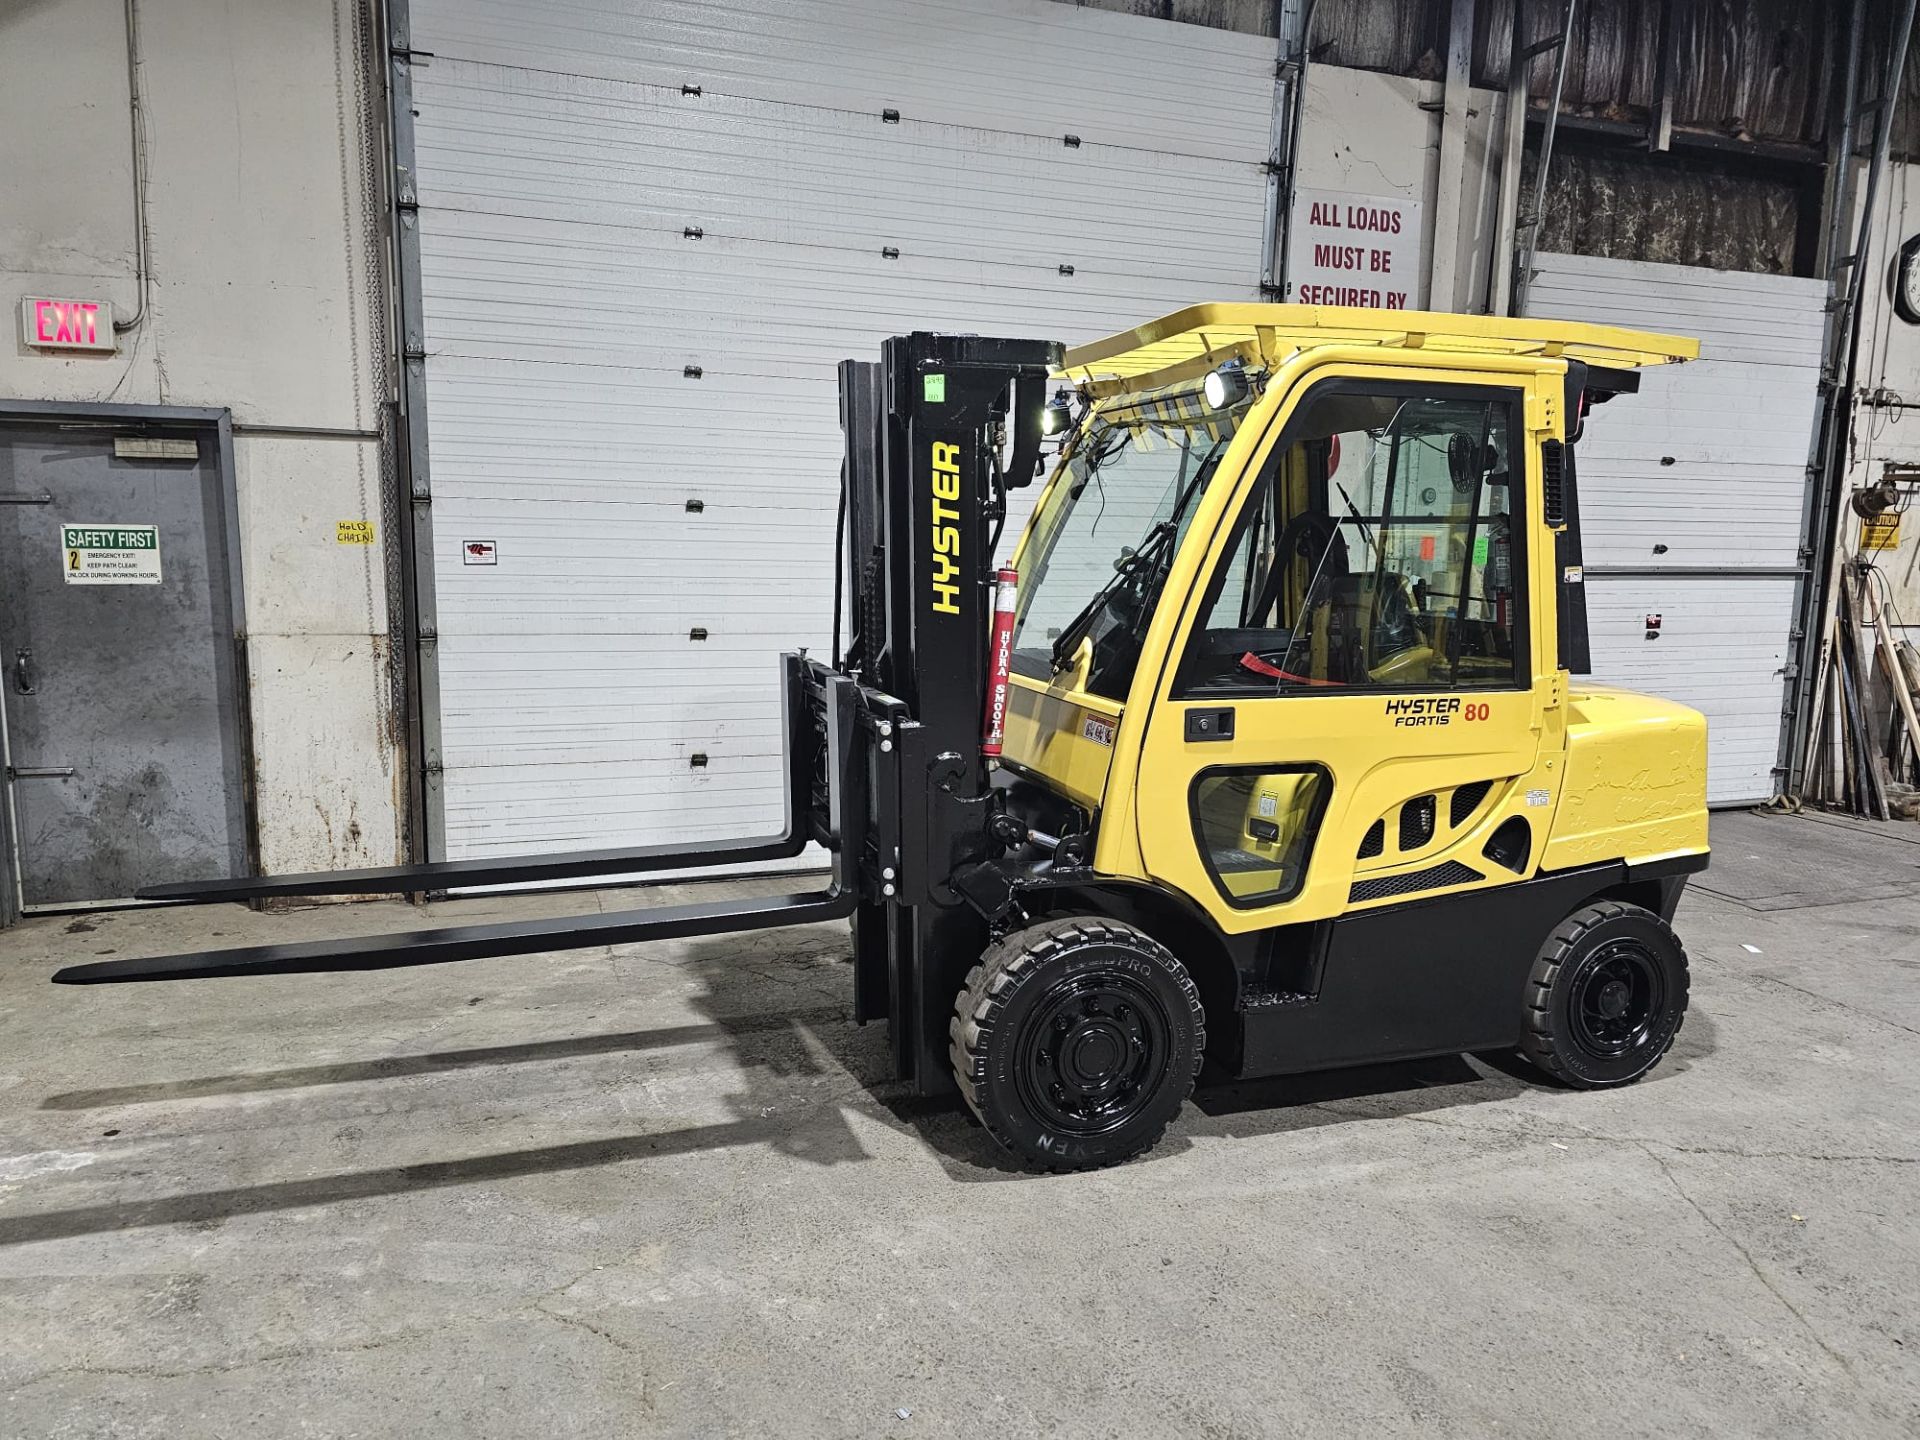 2017 Hyster 8,000lbs Capacity OUTDOOR Forklift NEW 72" Forks & NEW Sideshift, Diesel & 3 STAGE